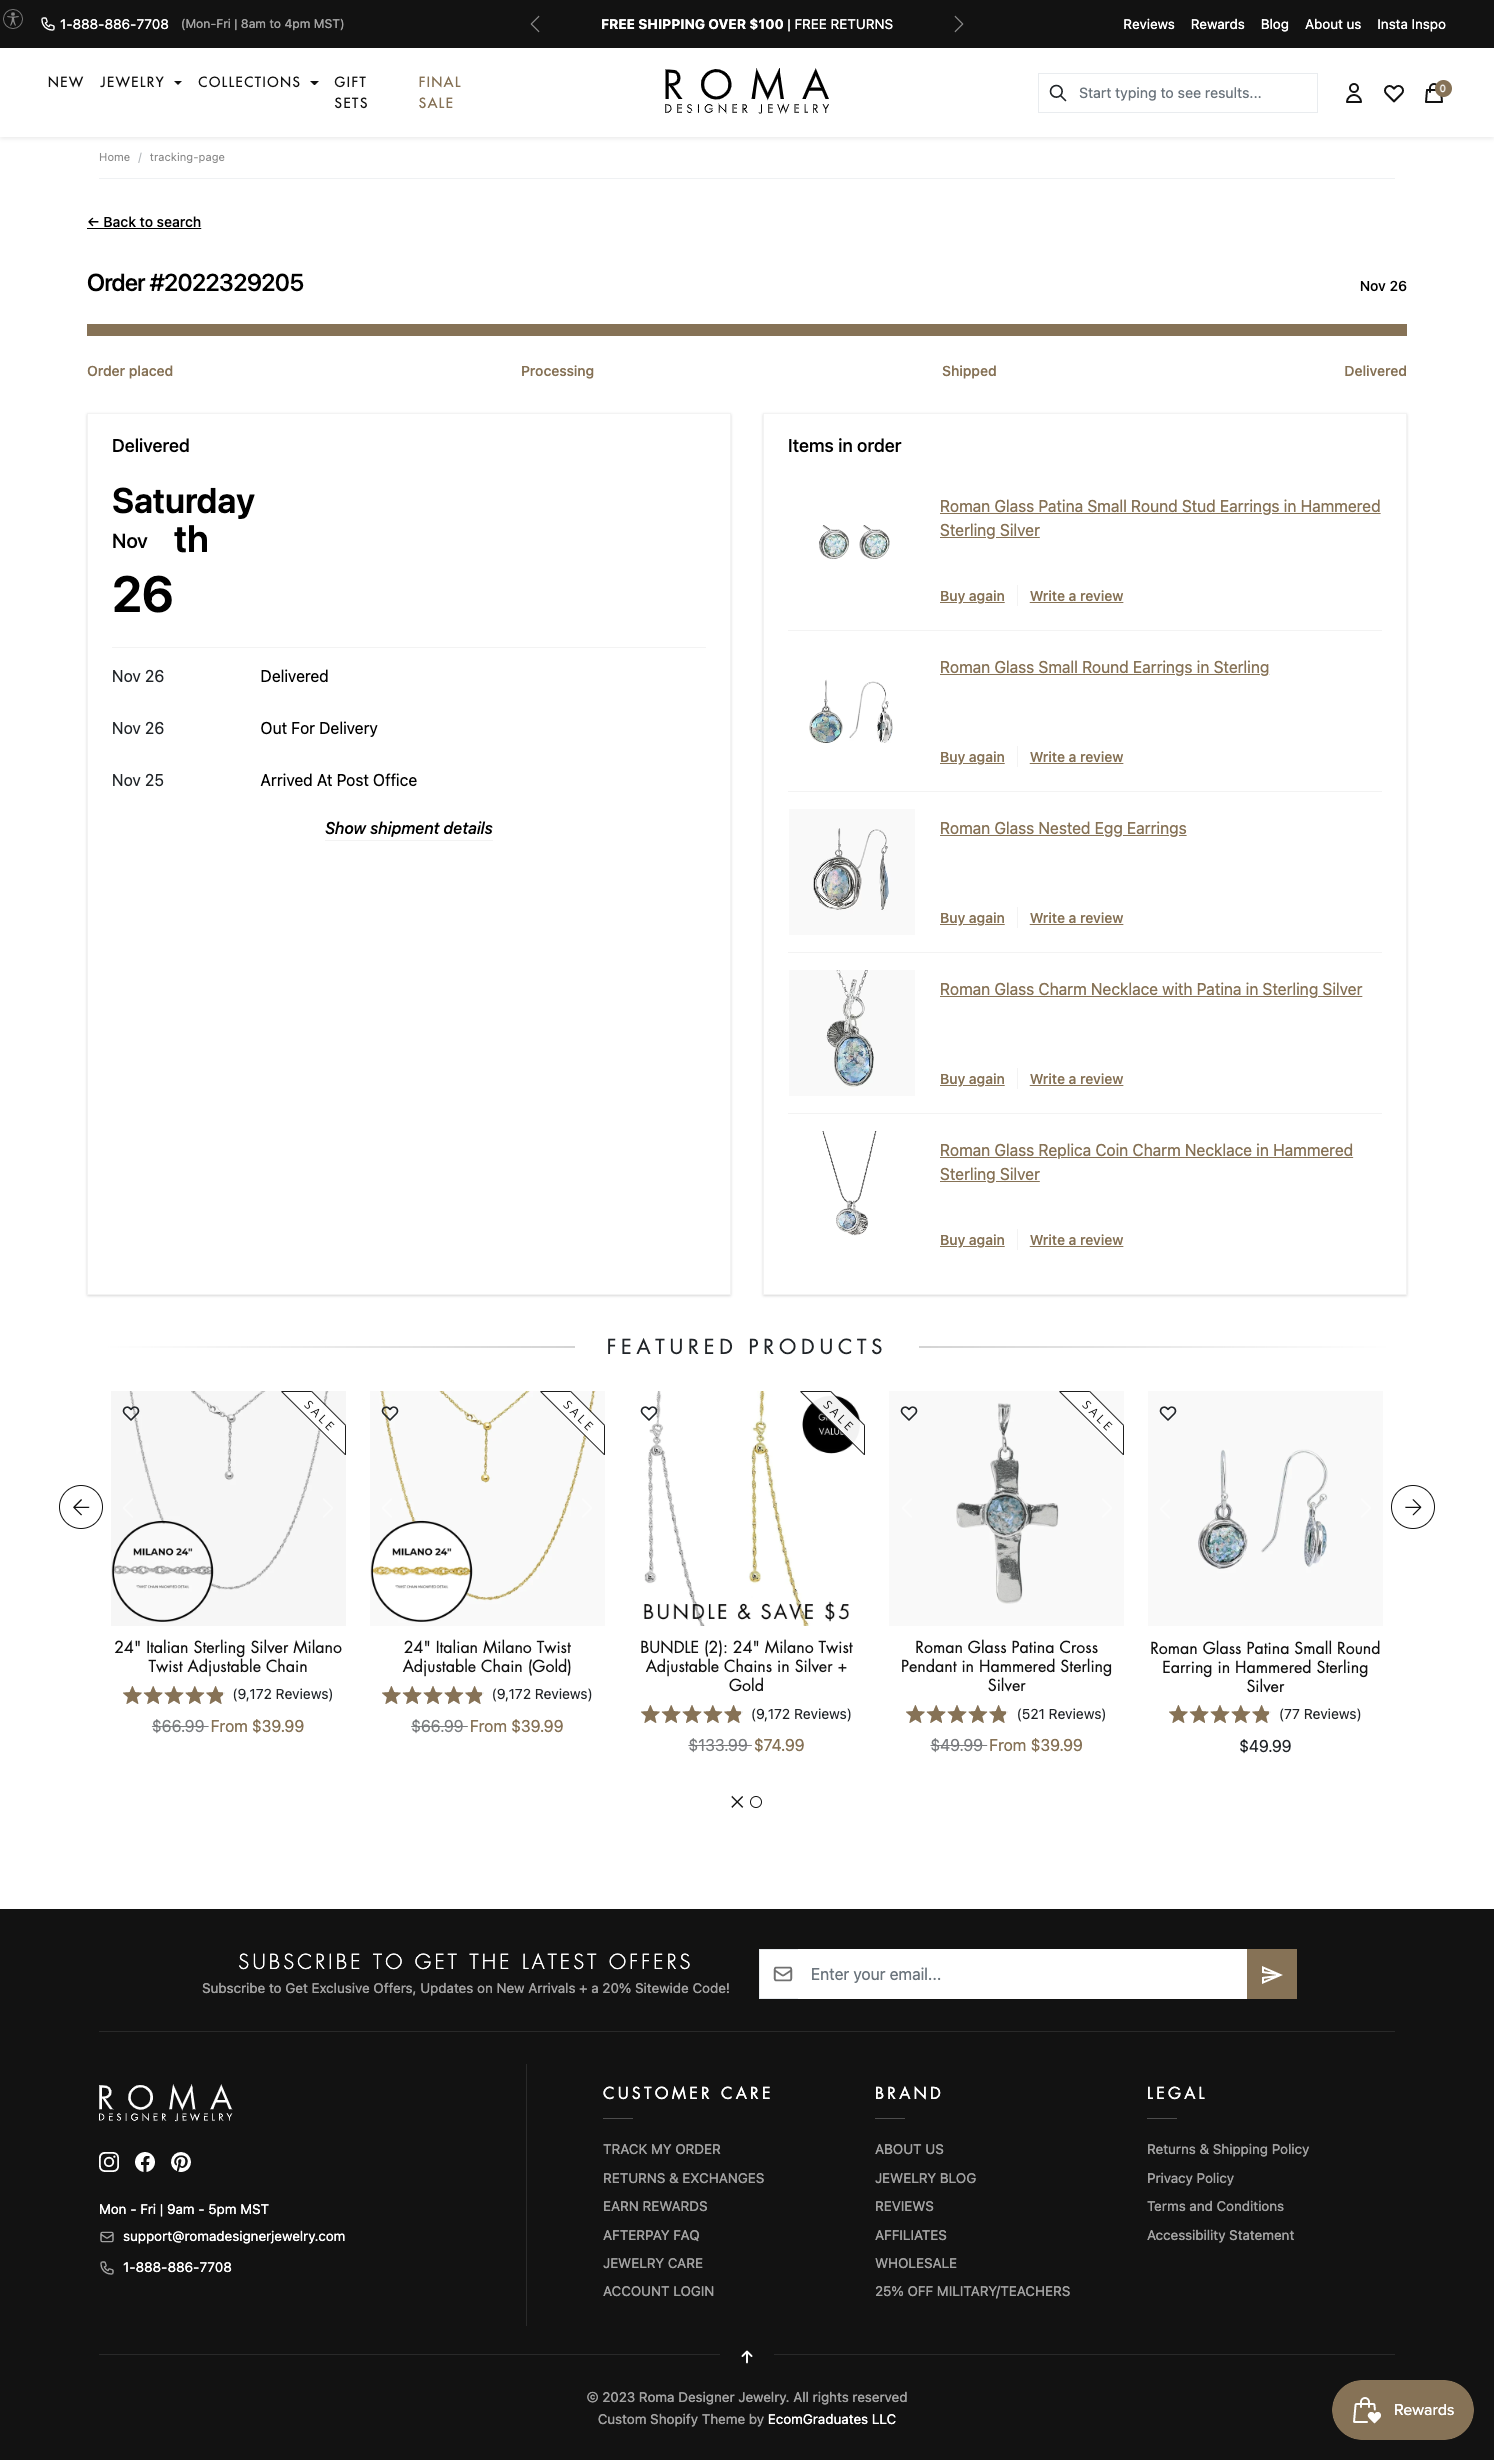 Roma Designer Jewelry branded tracking page